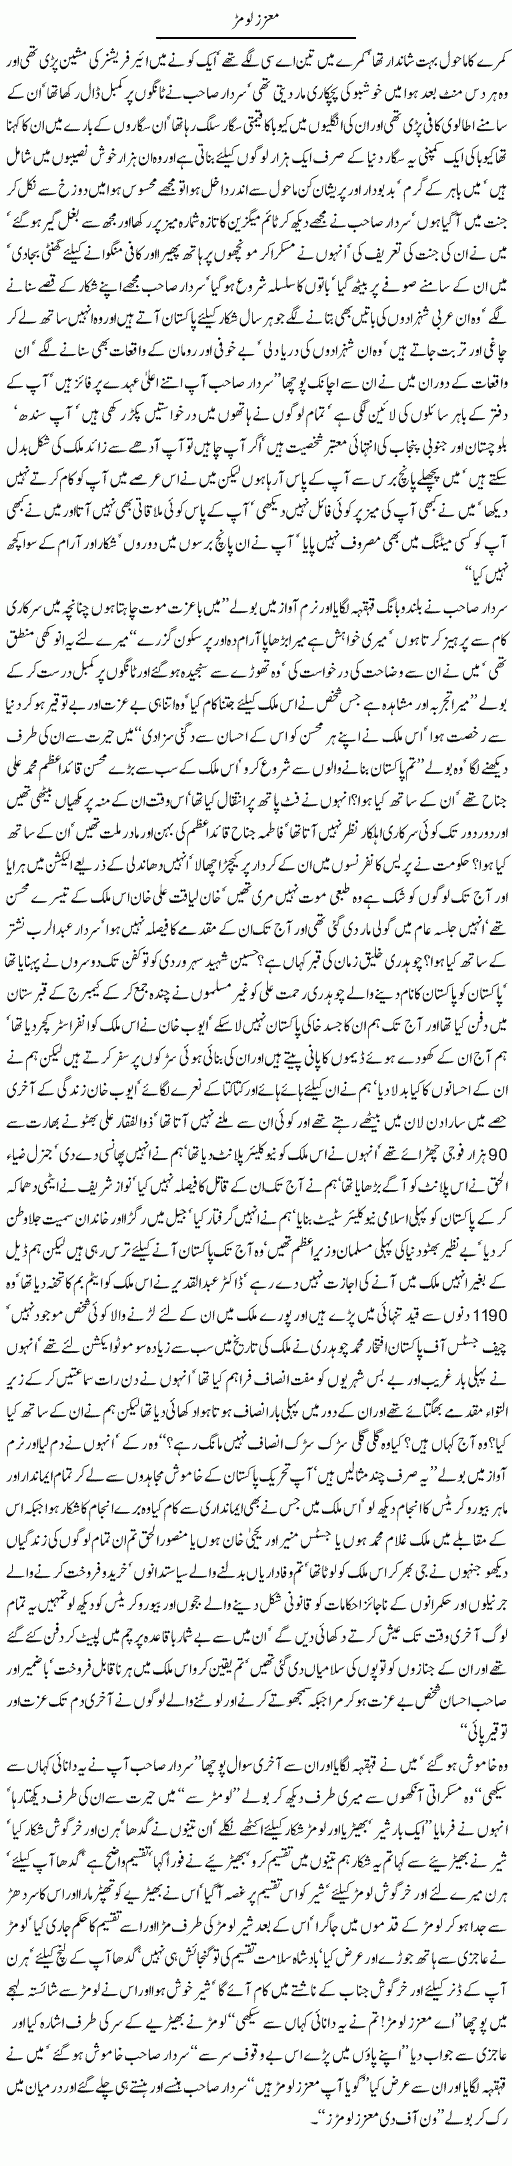 Moazzaz Loomar (Fox) by Javed Chaudhry